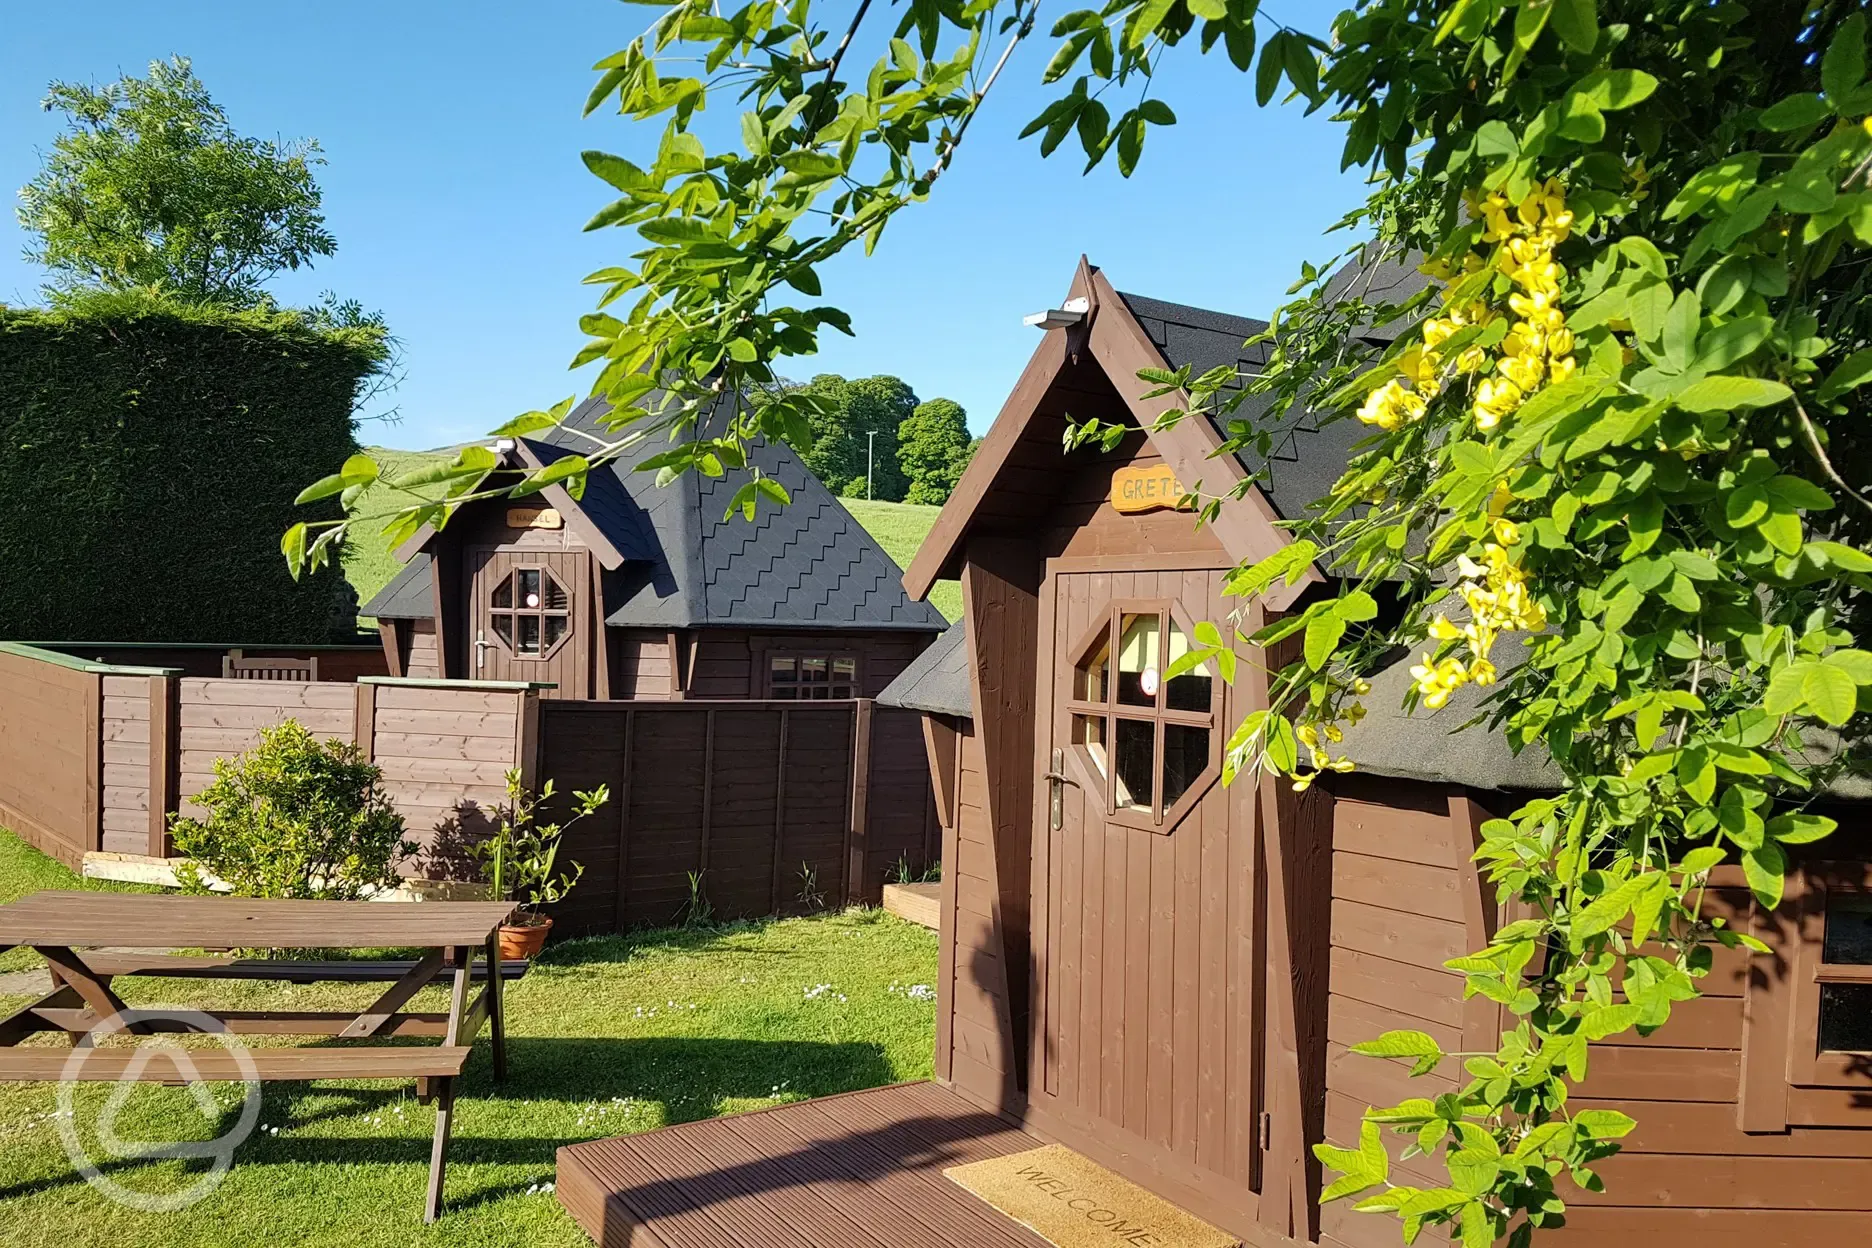 Hansel and Gretel glamping pods